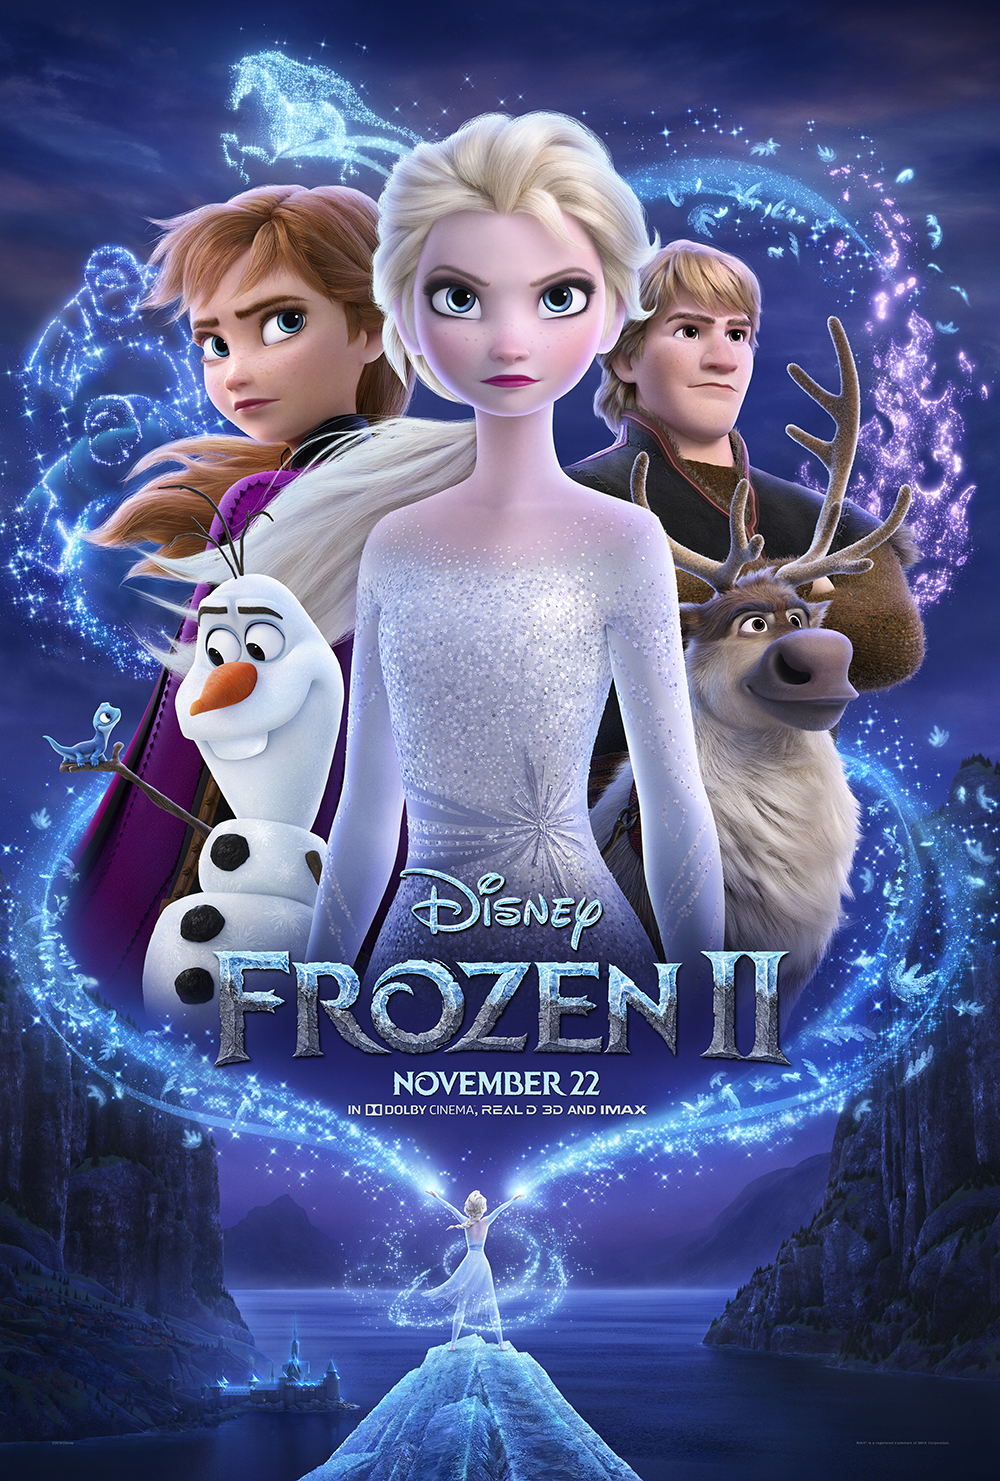 Frozen 2 - Available as a download or stream?